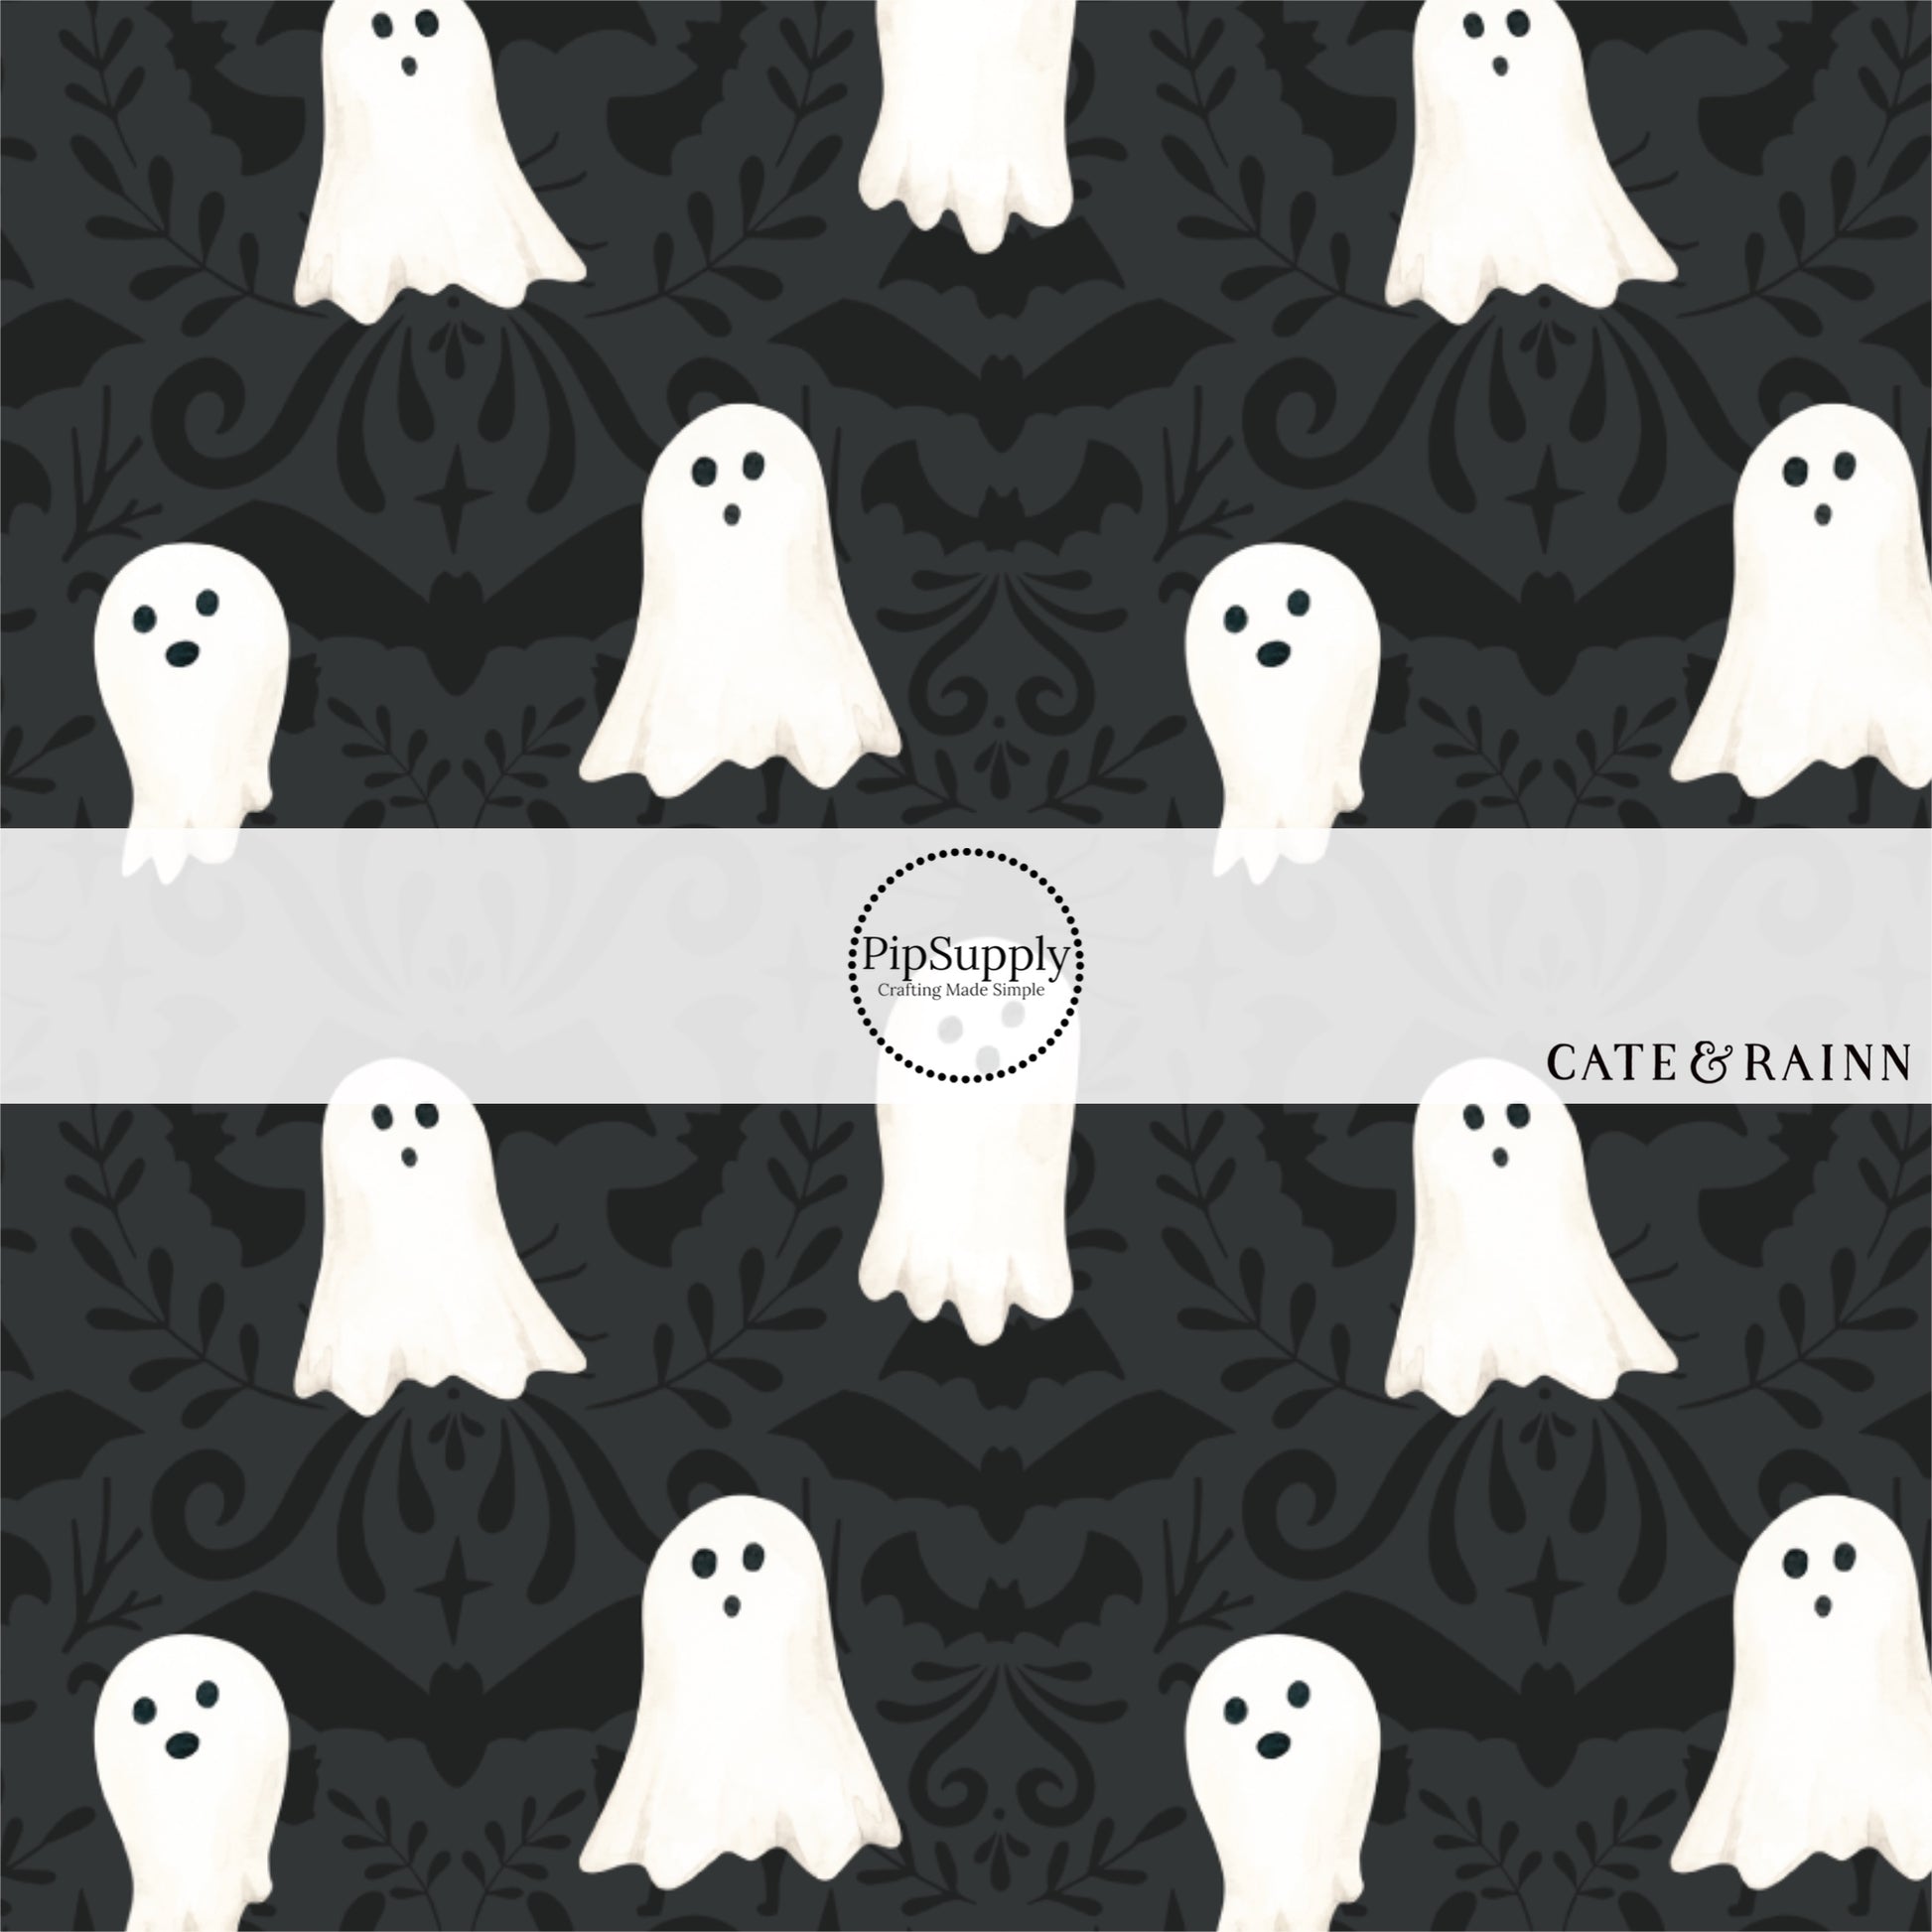 These Halloween themed black fabric by the yard features white ghosts on black Halloween pattern. This fun spooky themed fabric can be used for all your sewing and crafting needs! 